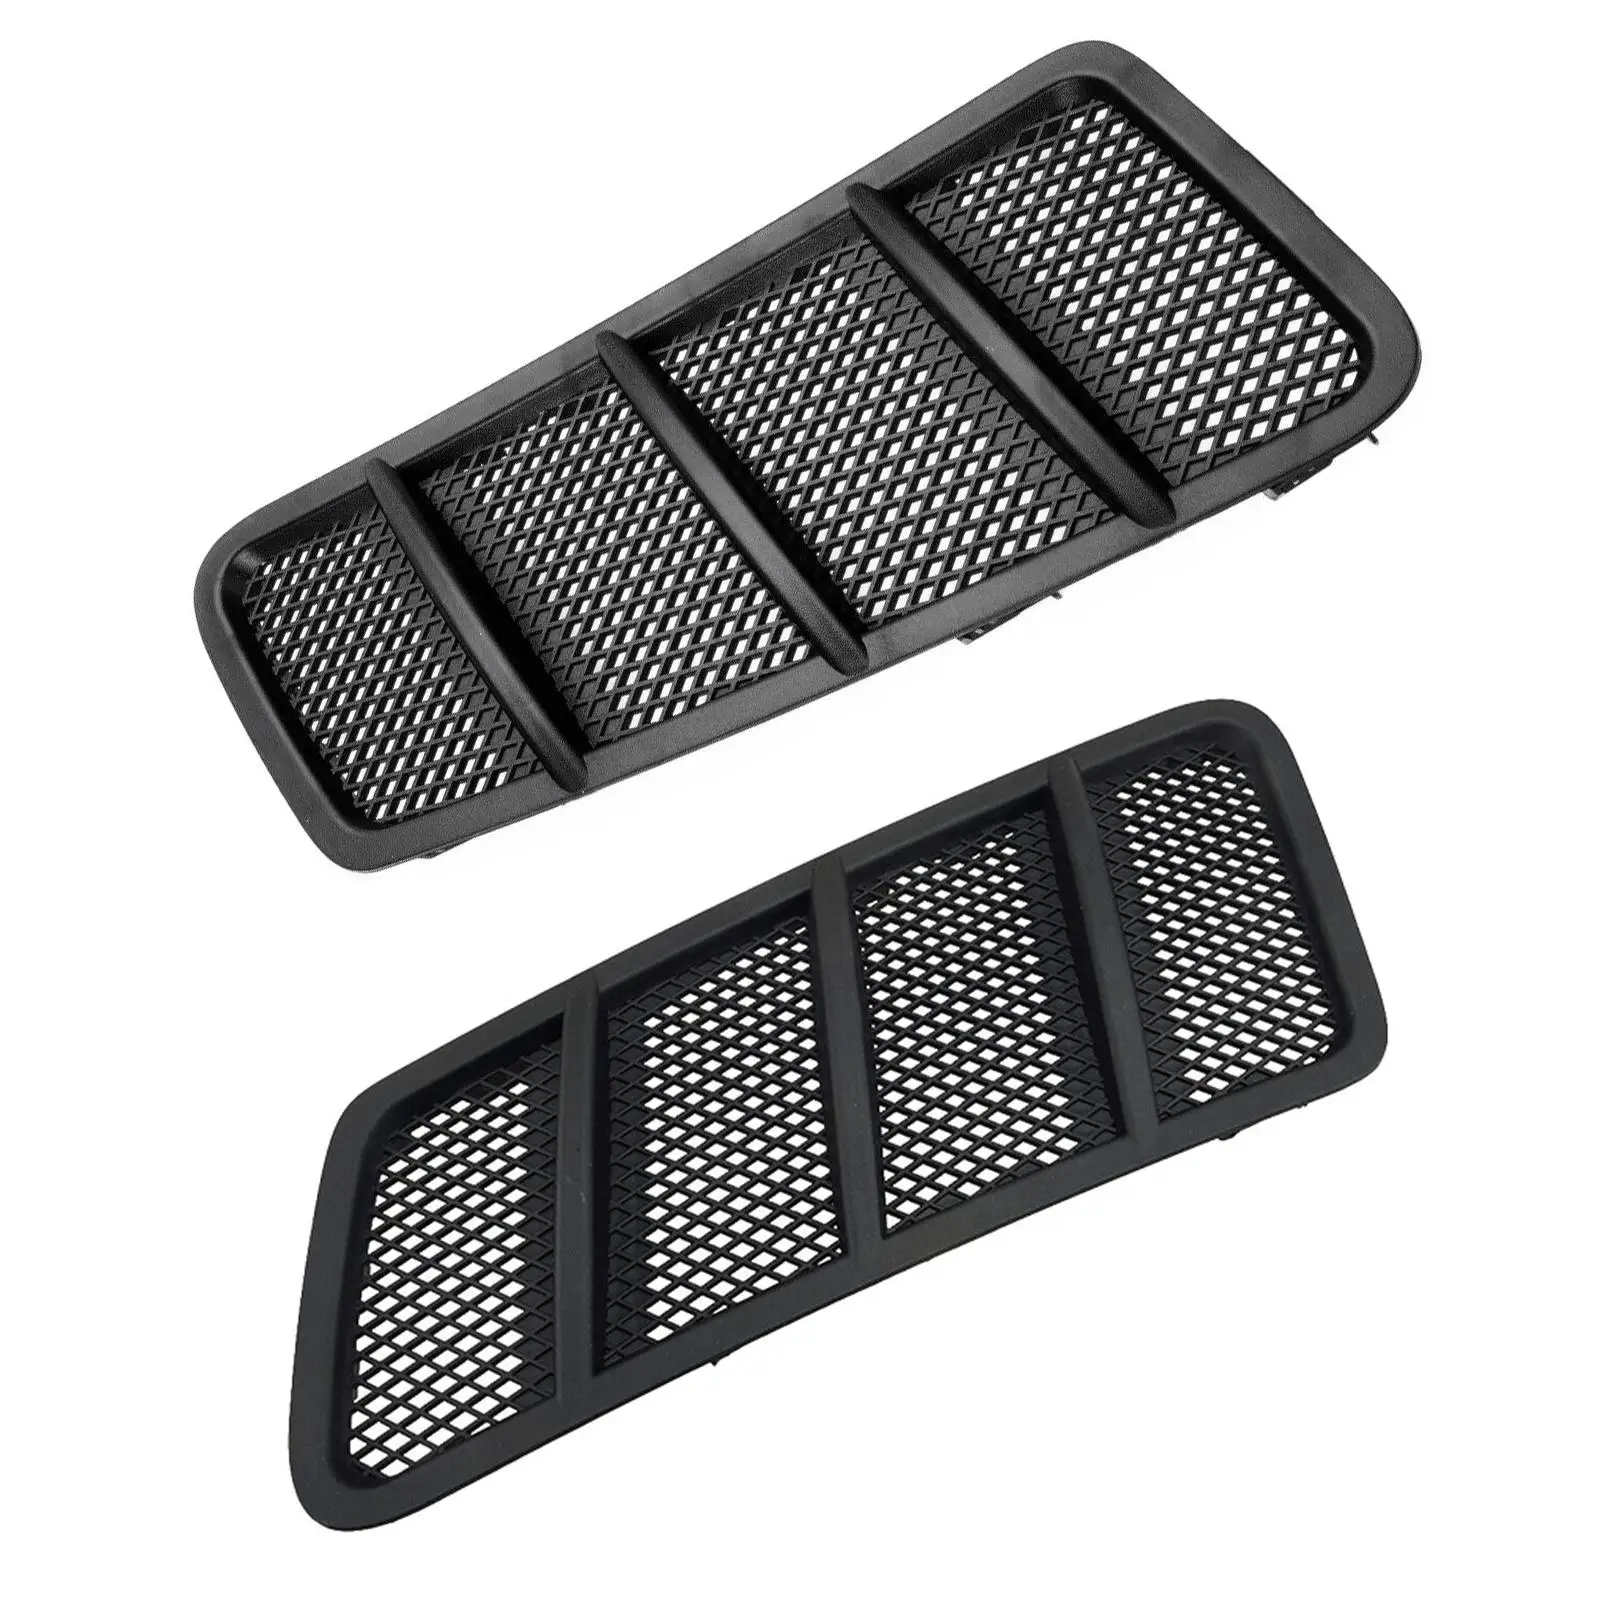 Hood Air Vent Grille Black High Quality Replace High Performance for Mercedes-benz W166 GL450 GL550 GL350 ml550